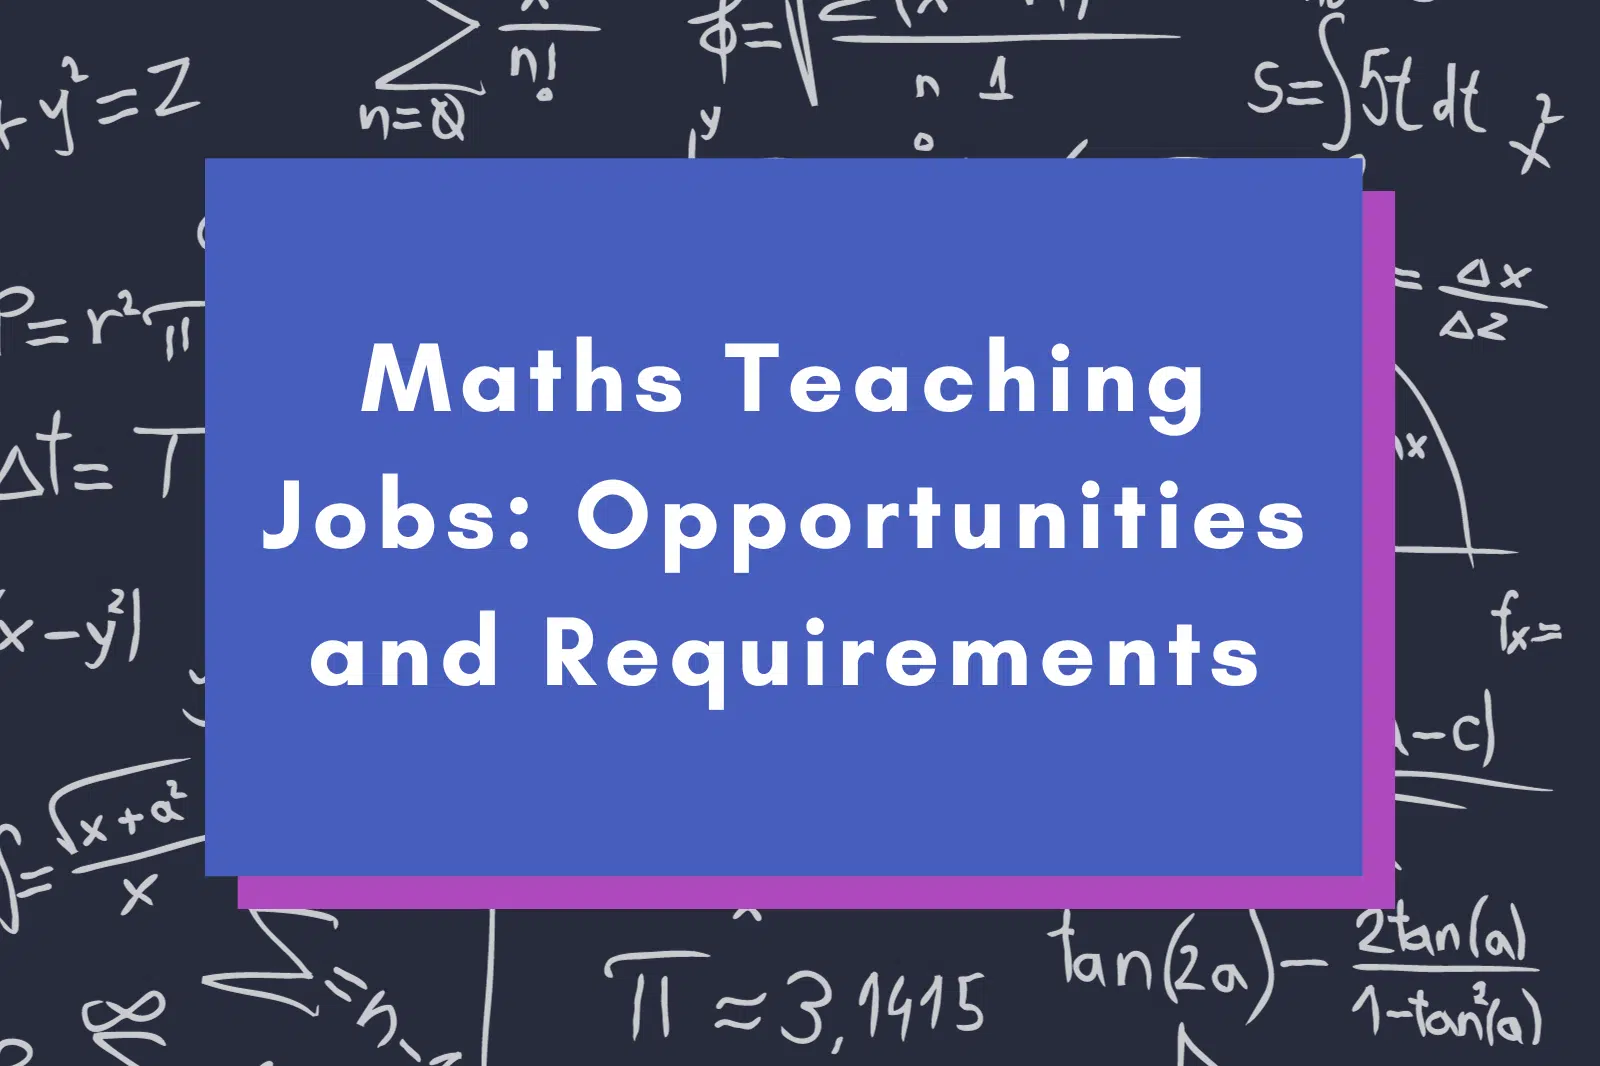 Maths Teaching Jobs: Opportunities and Requirements